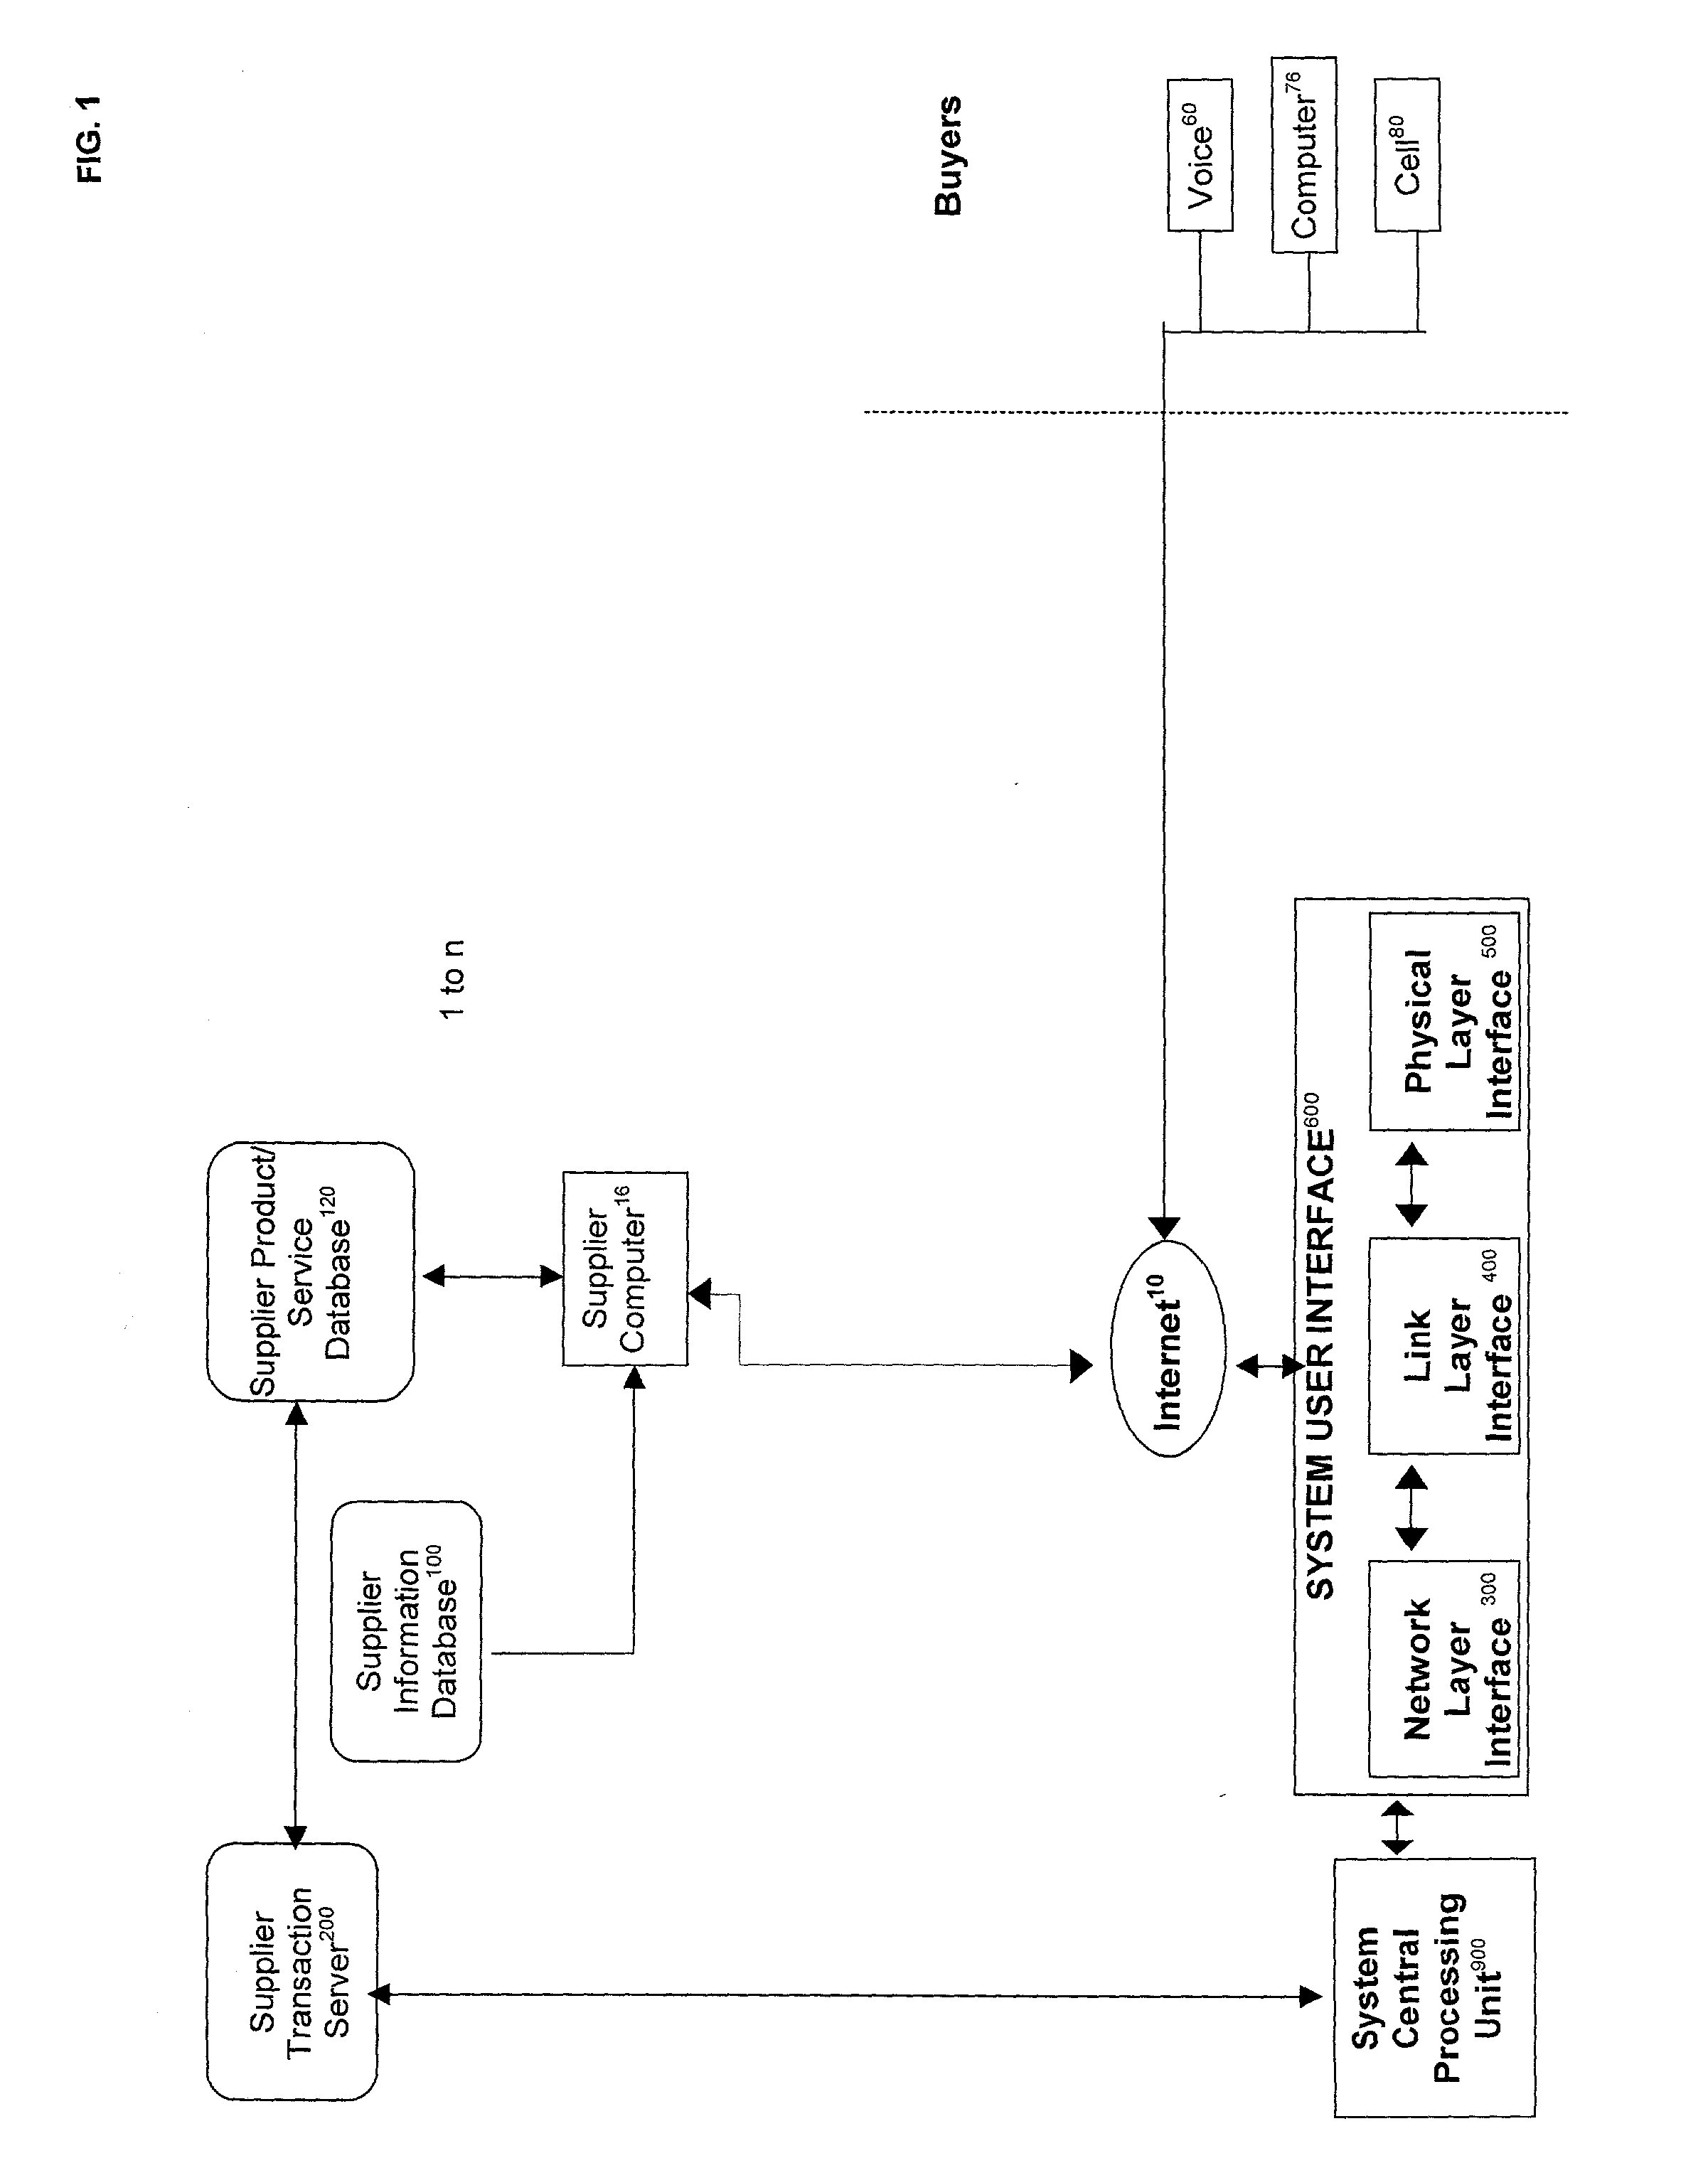 Smart multi-search method and system